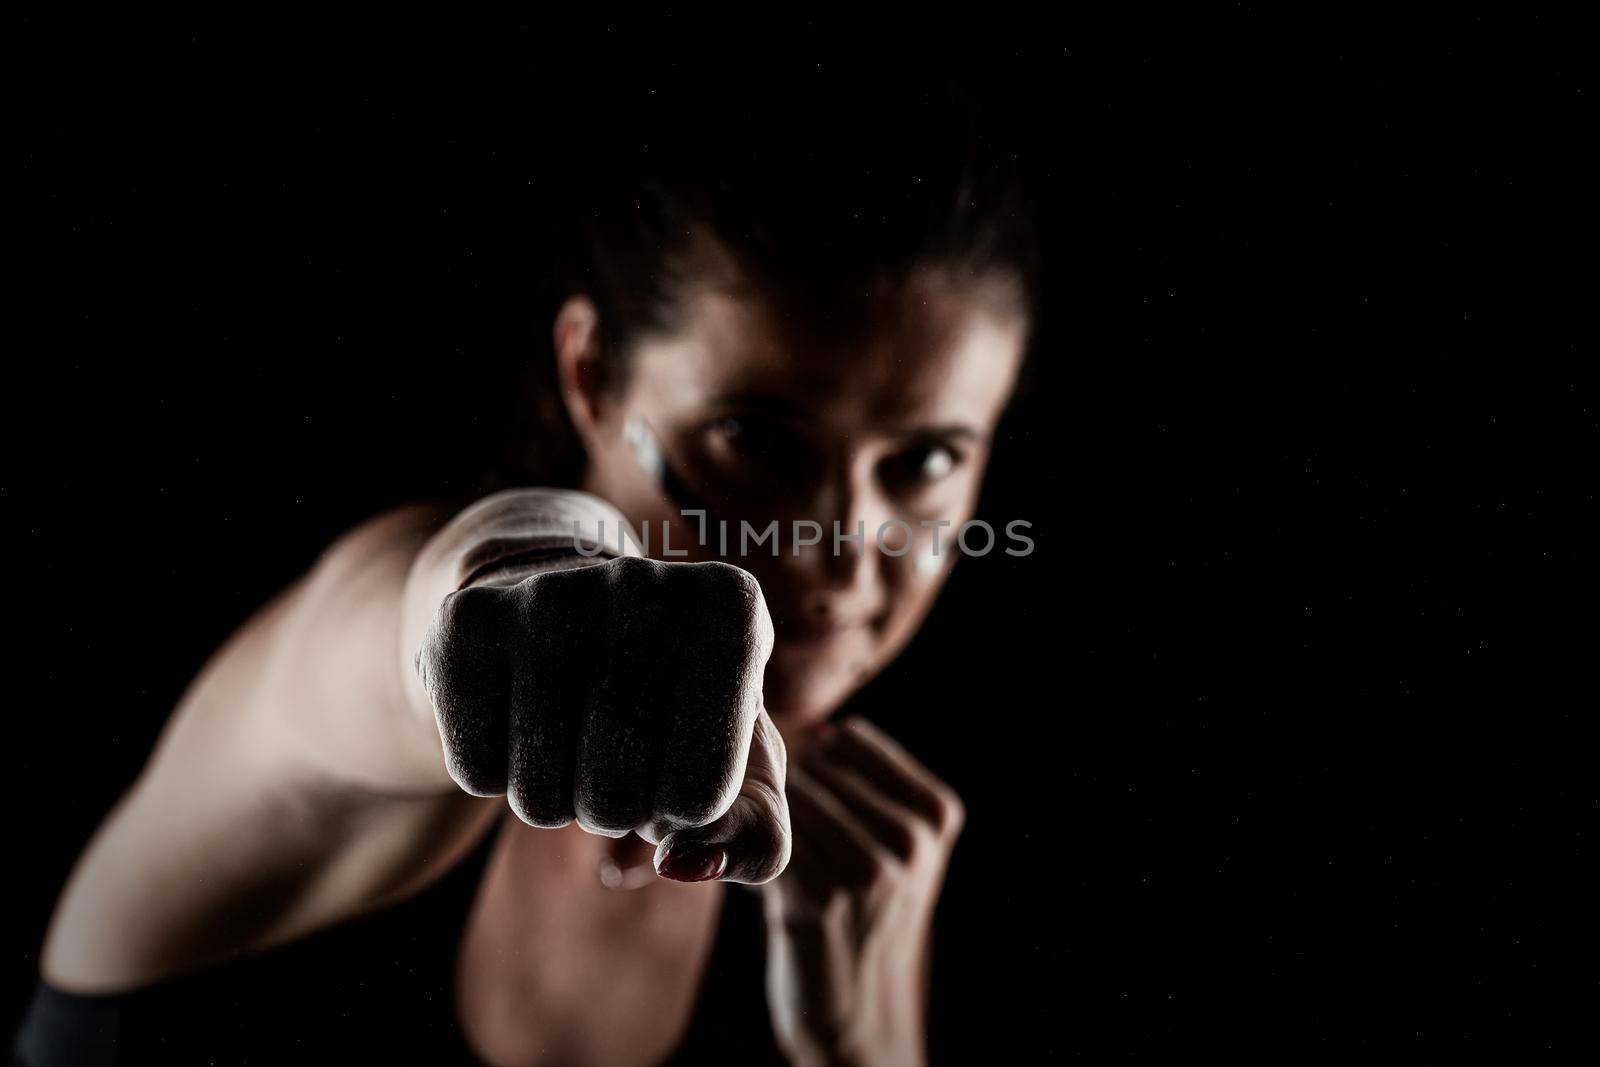 Kickboxer kirl with magnesium powder on her hands punching with dust visible.. by kokimk